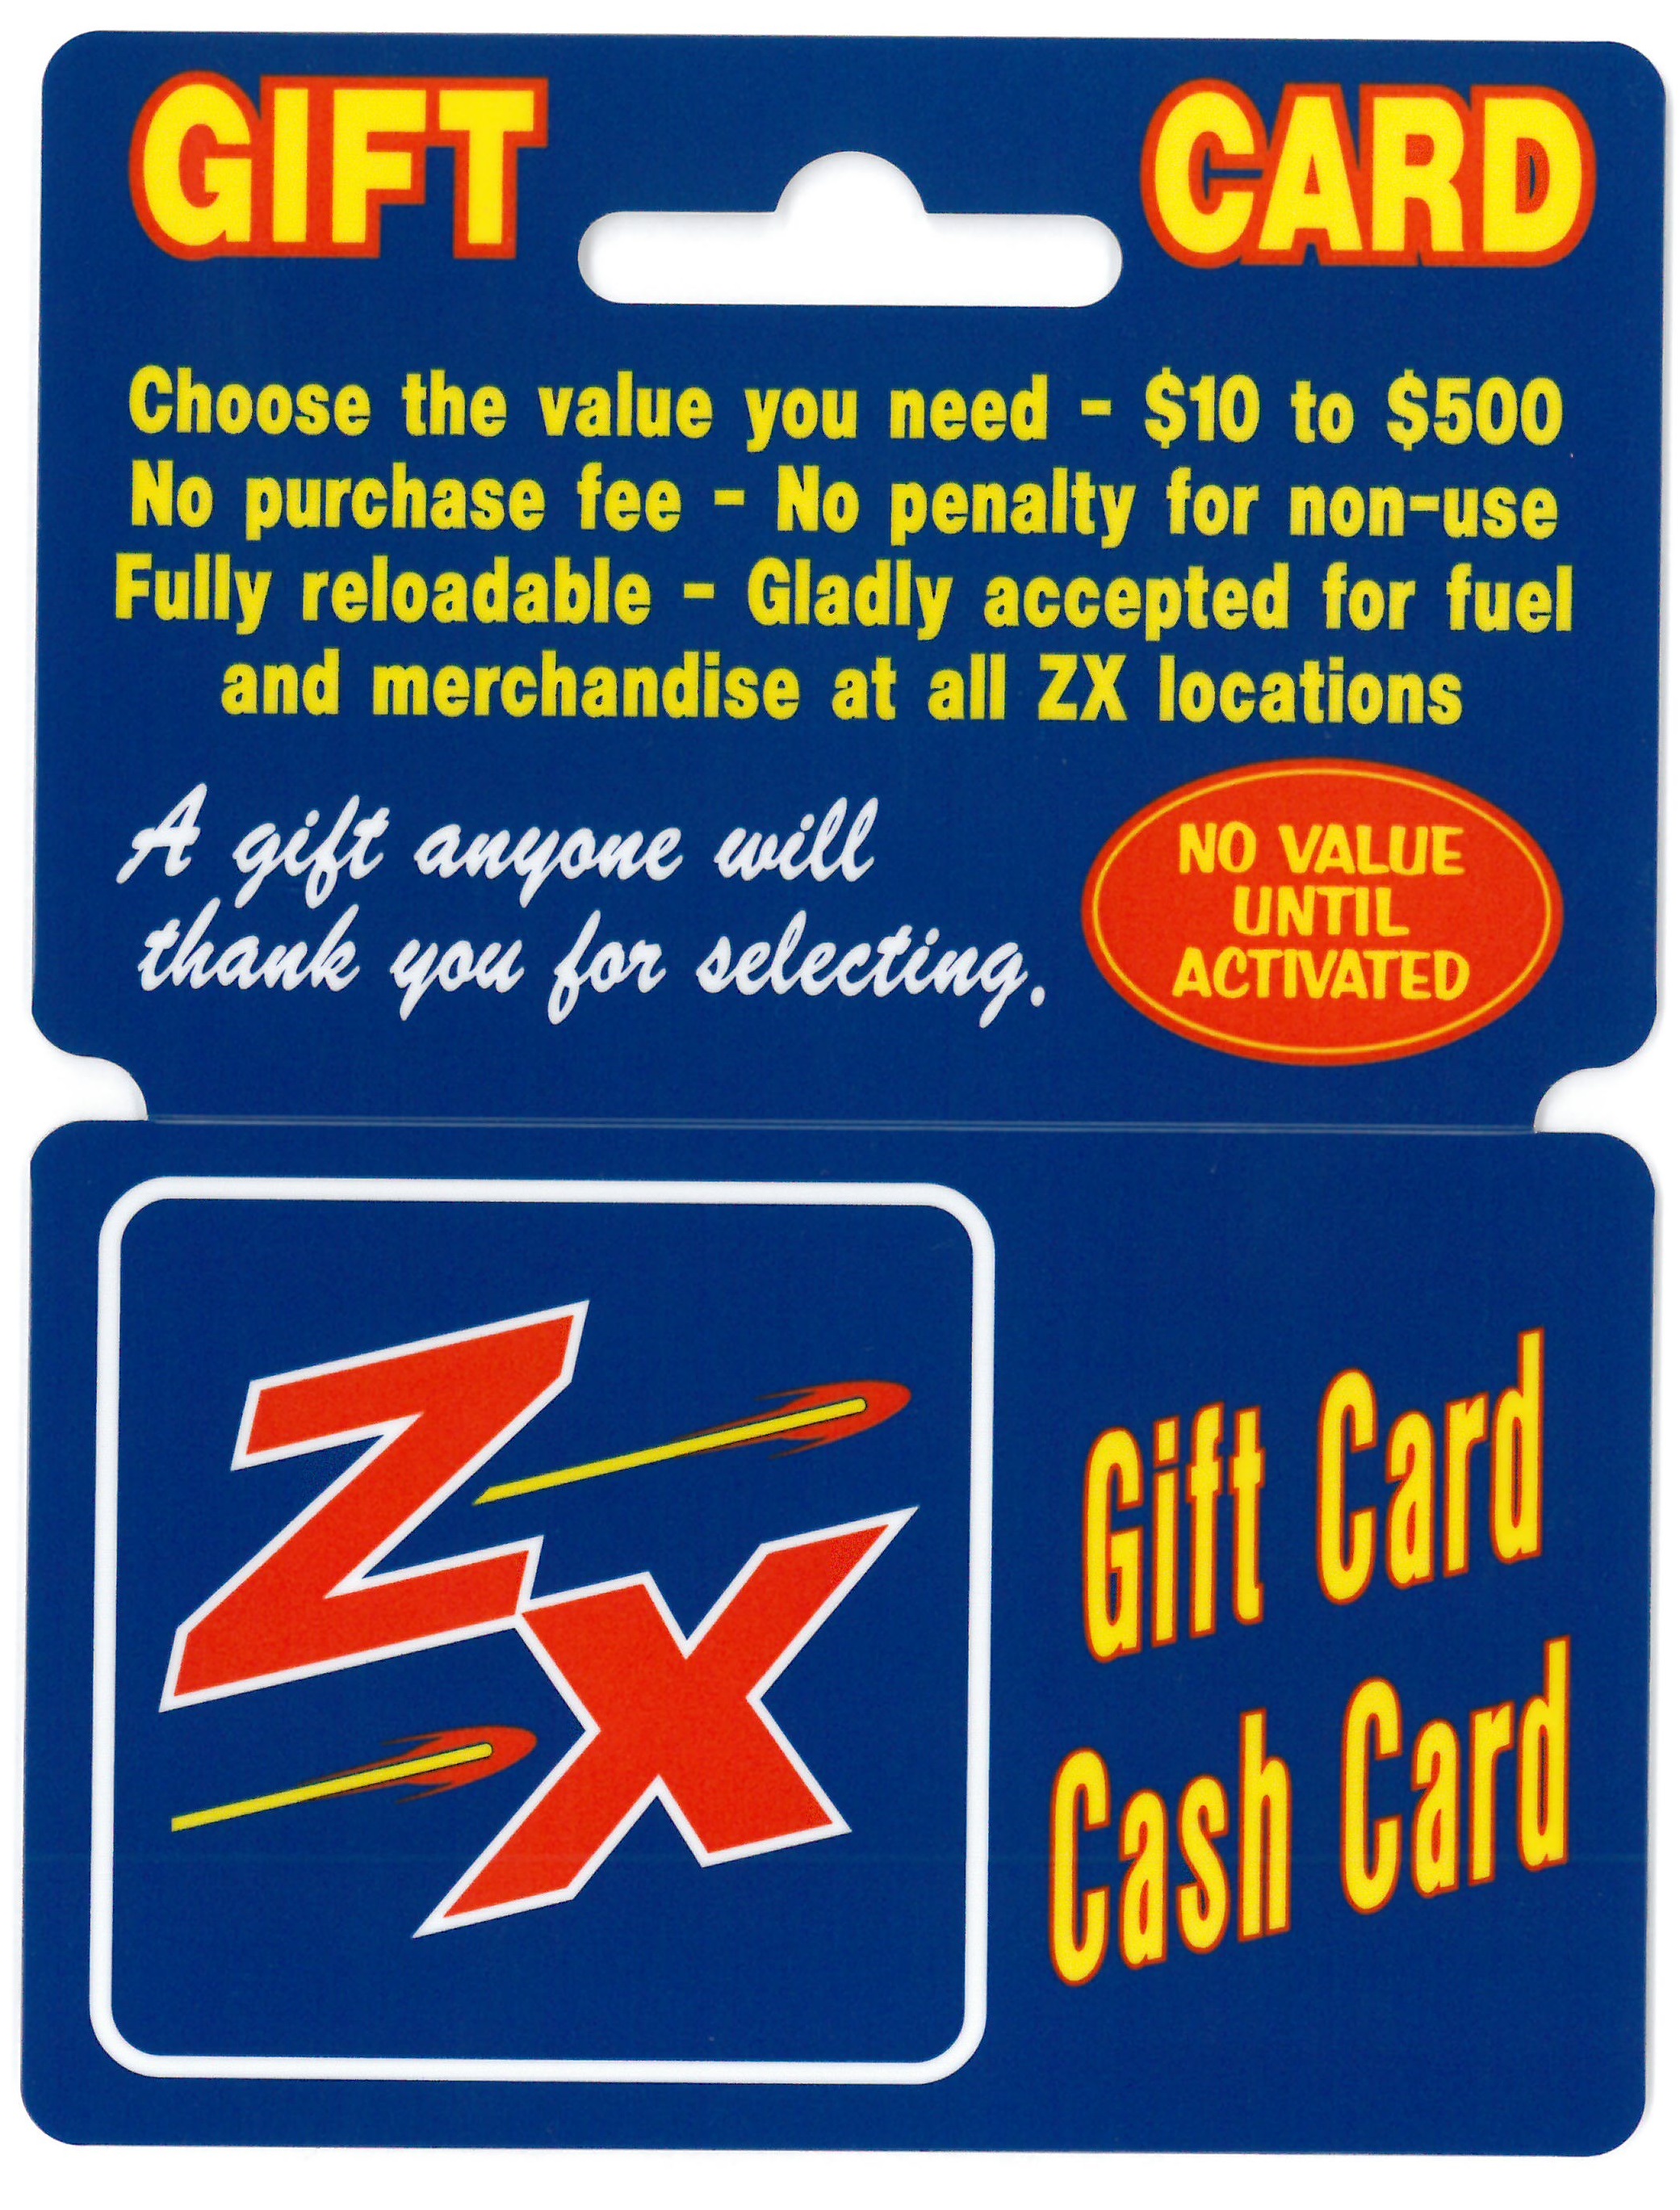 About - ZX Gas Stations and Convenience Stores